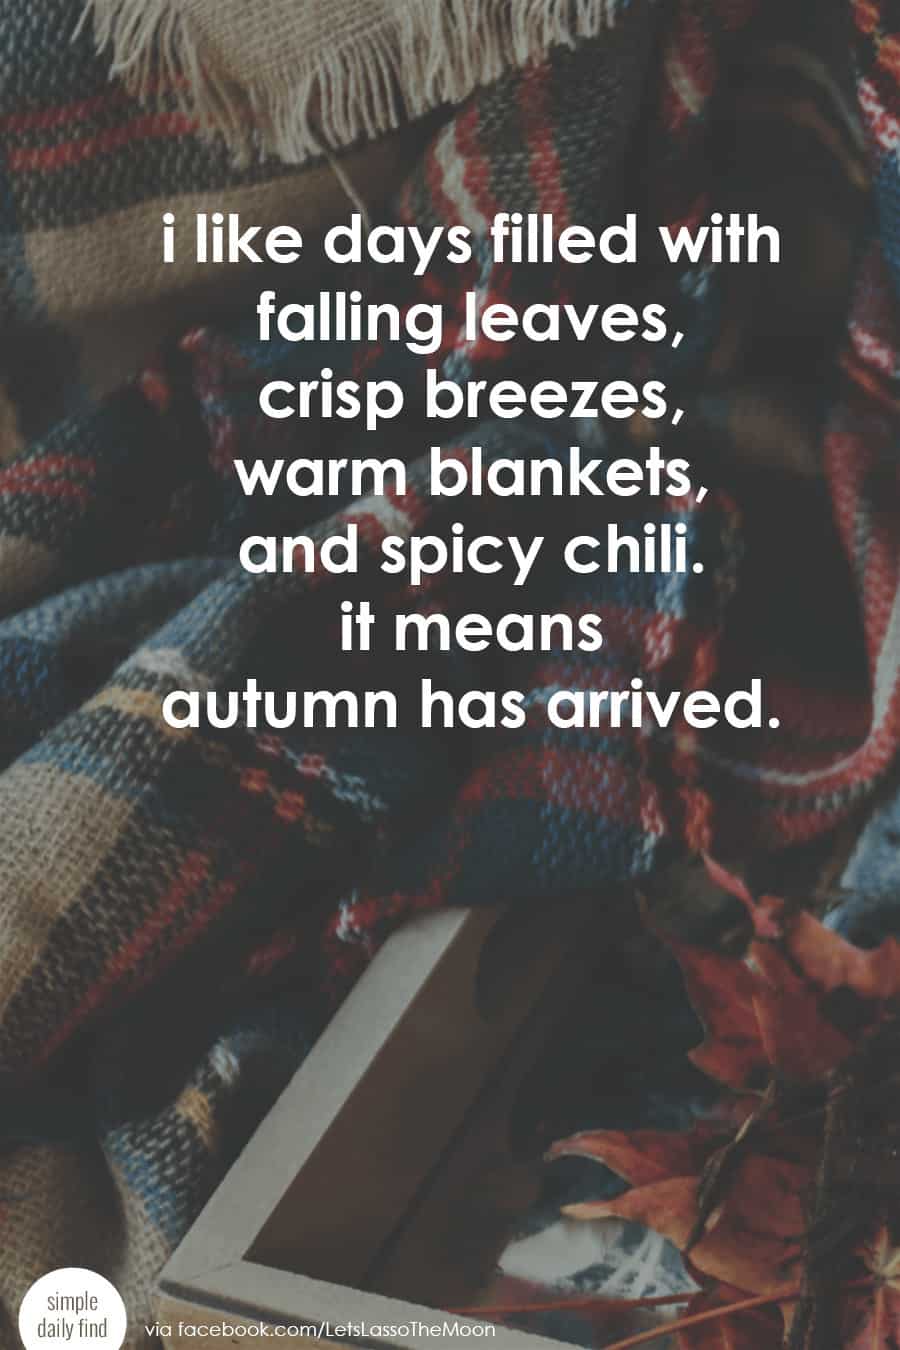 i like days filled with crisp breezes, falling leaves, warm blankets, and spicy chili. it means autumn has arrived. #quote*love this. love fall.